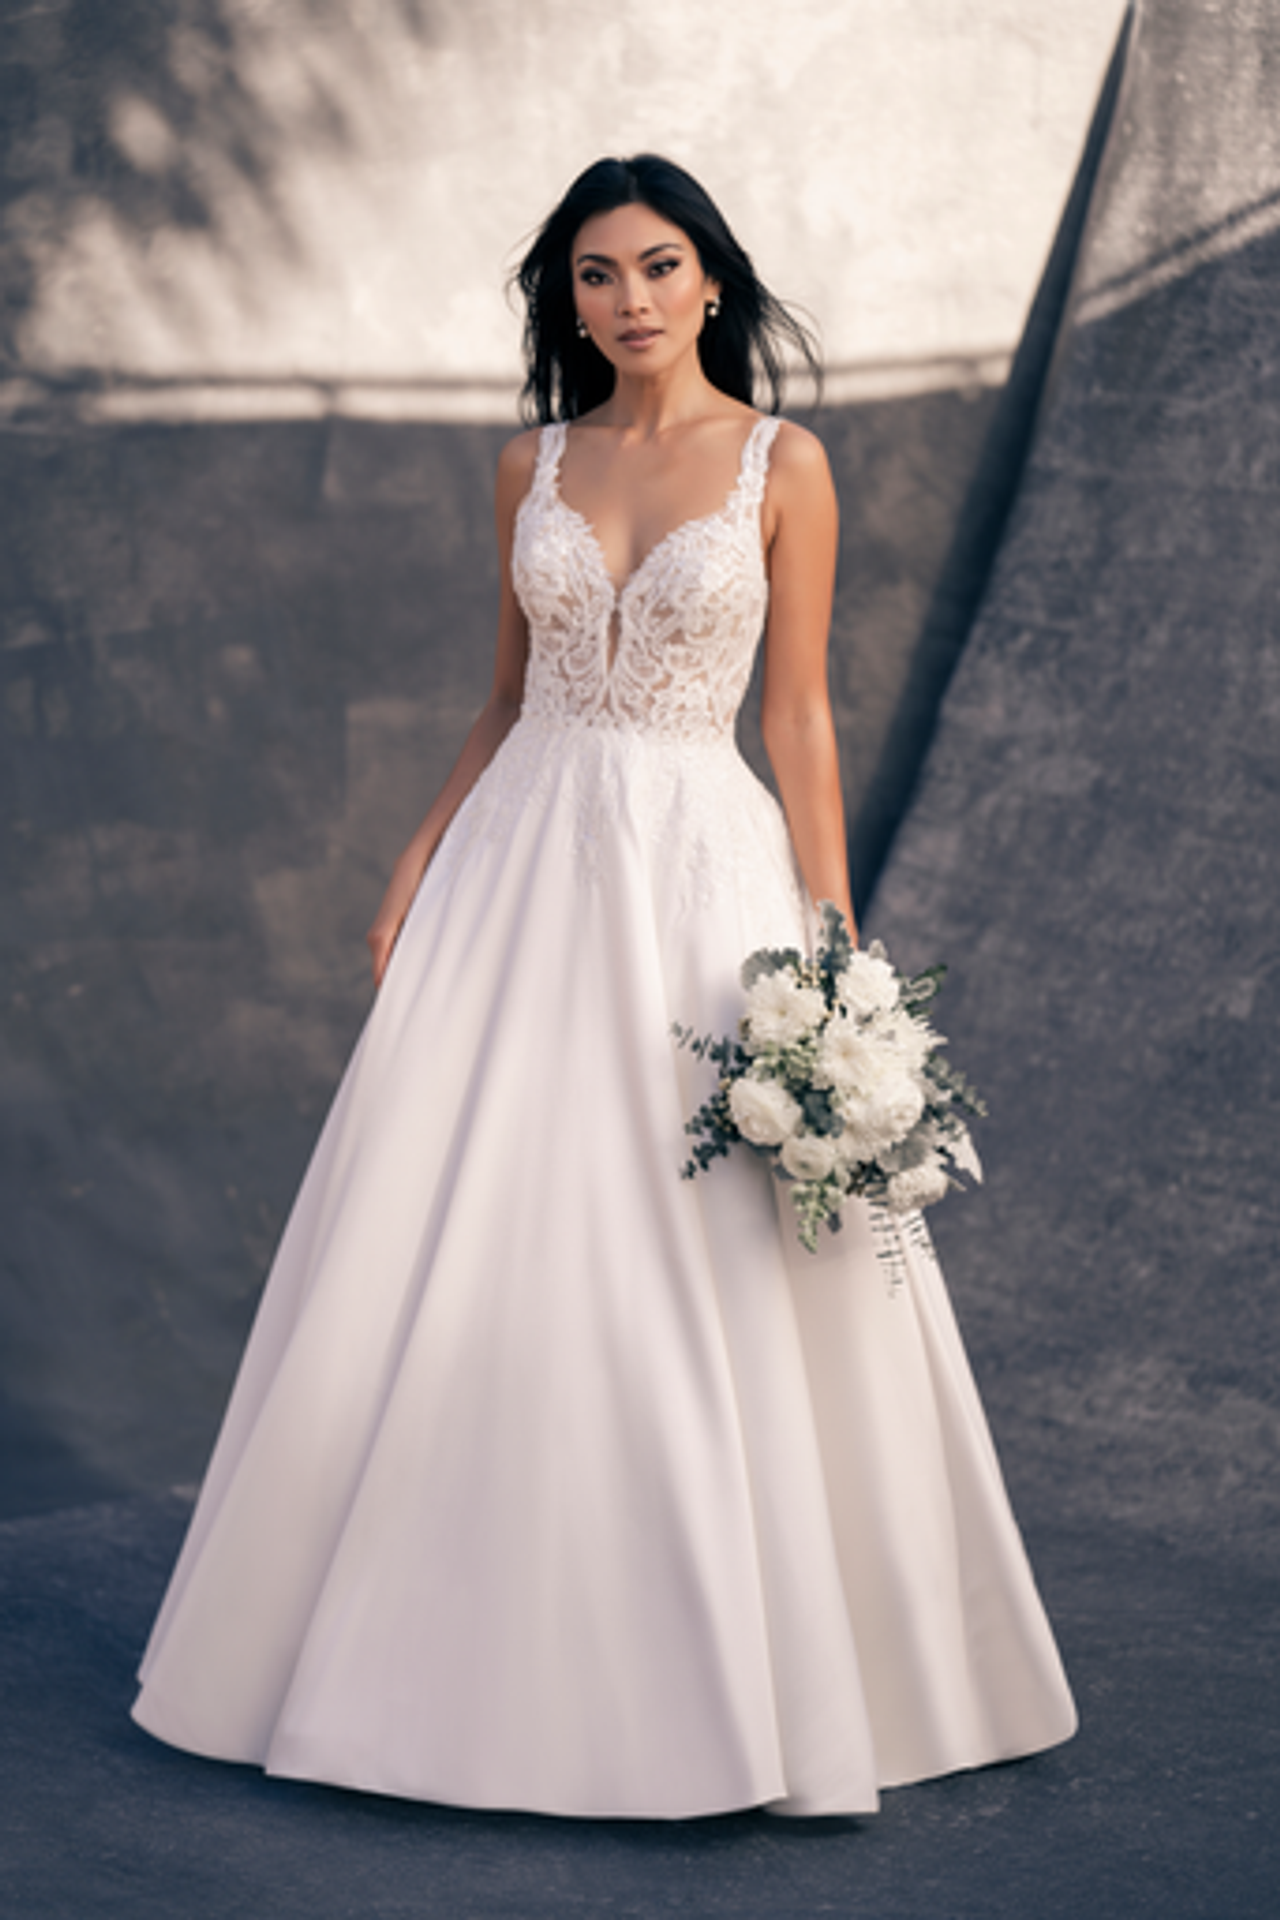 Classic Ballgown With Beaded Lace Appliques by Allure Bridals - Image 1